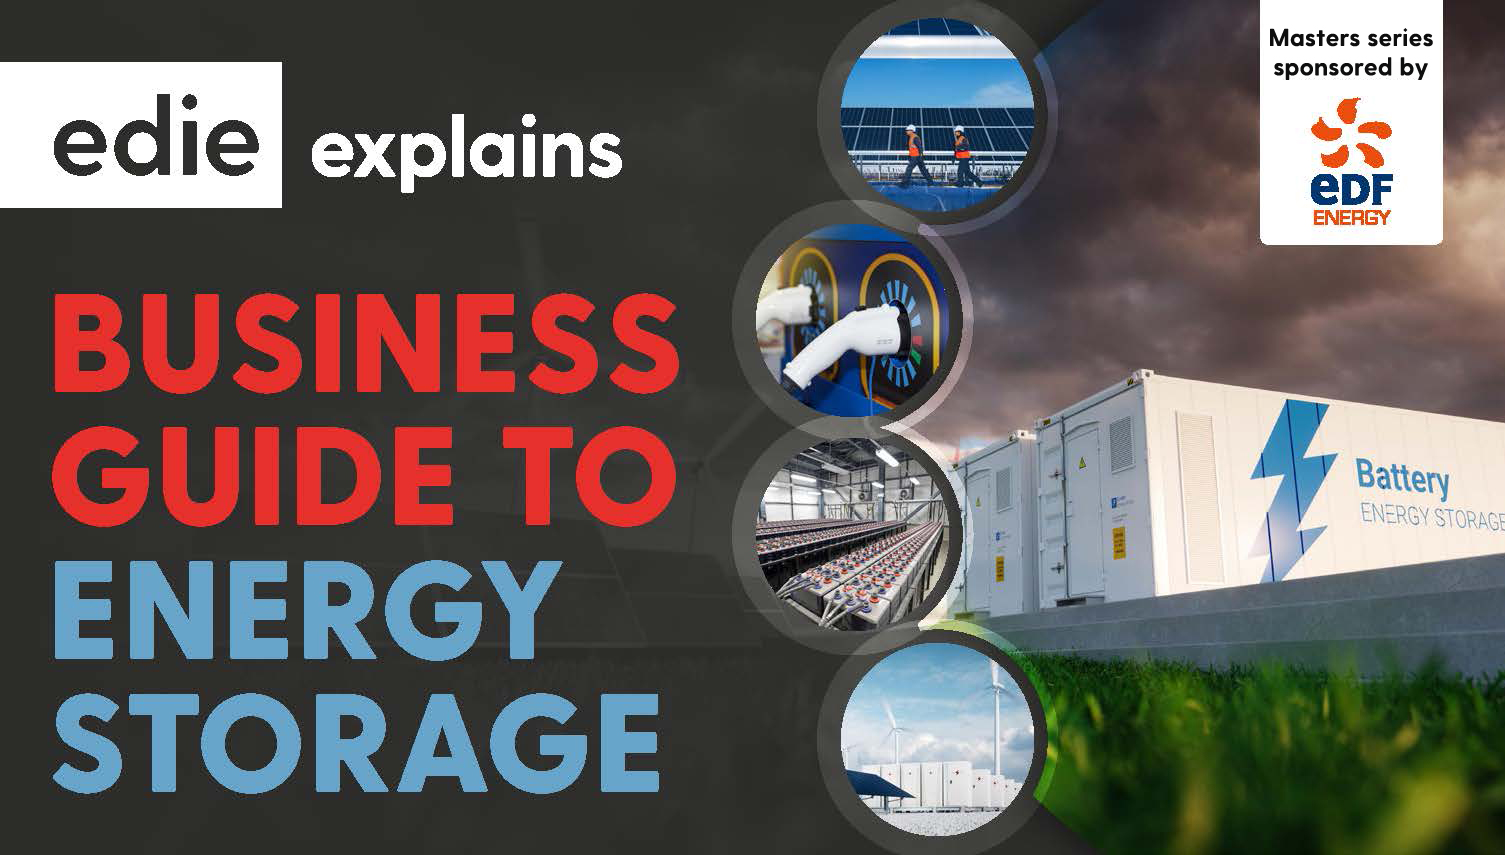 The business guide to energy storage